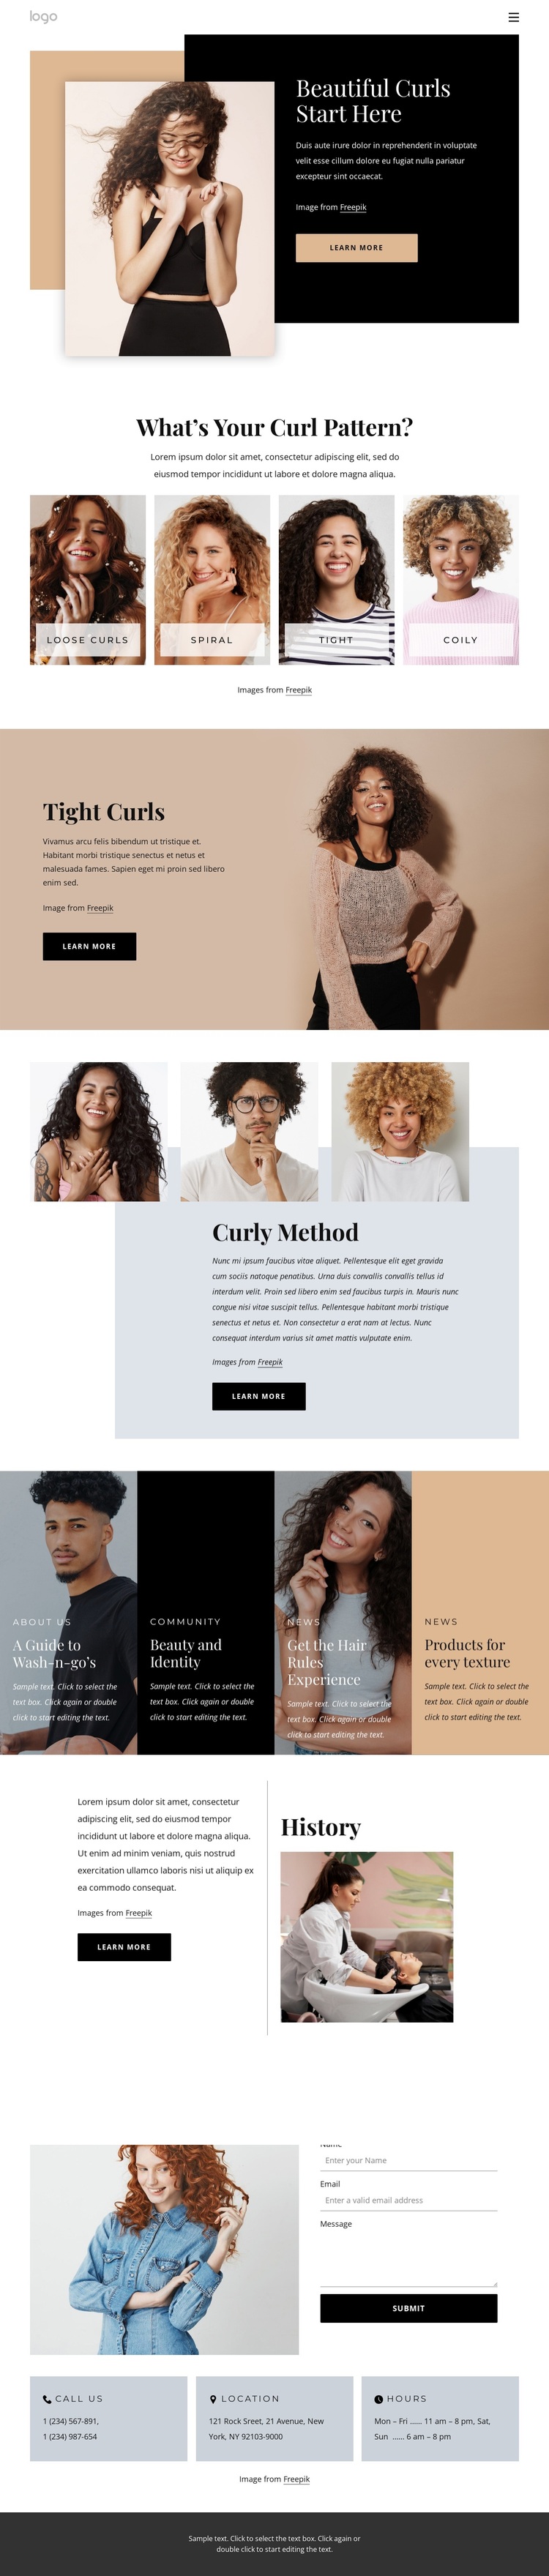 Bring out the best in your curls Template